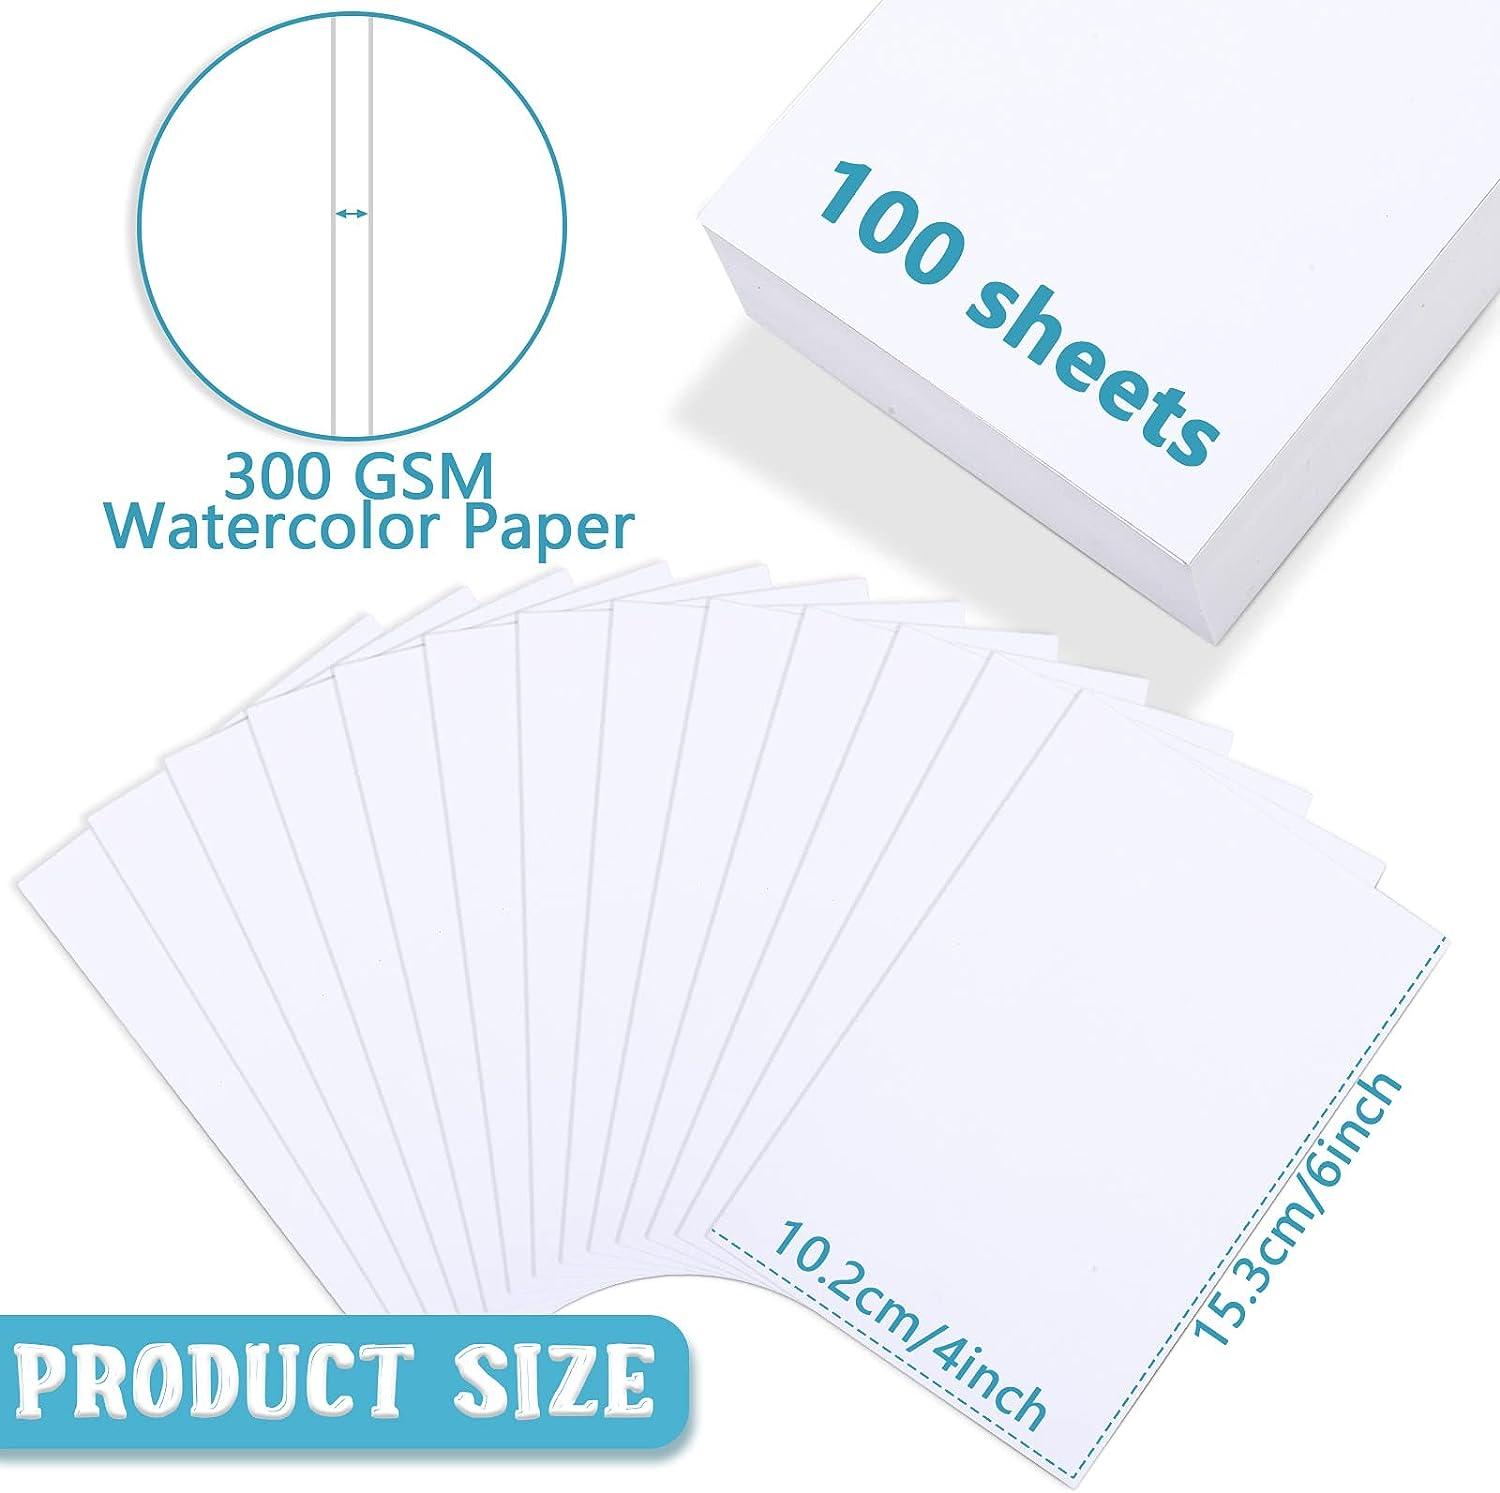  100 Sheet Blank Watercolor Cards with Envelopes, 140 LB / 300  GSM Heavyweight White Blank Cards 5 x 7 Inch Watercolor Cardstock Paper  Bulk for Painting Invitation Greeting Art Supply